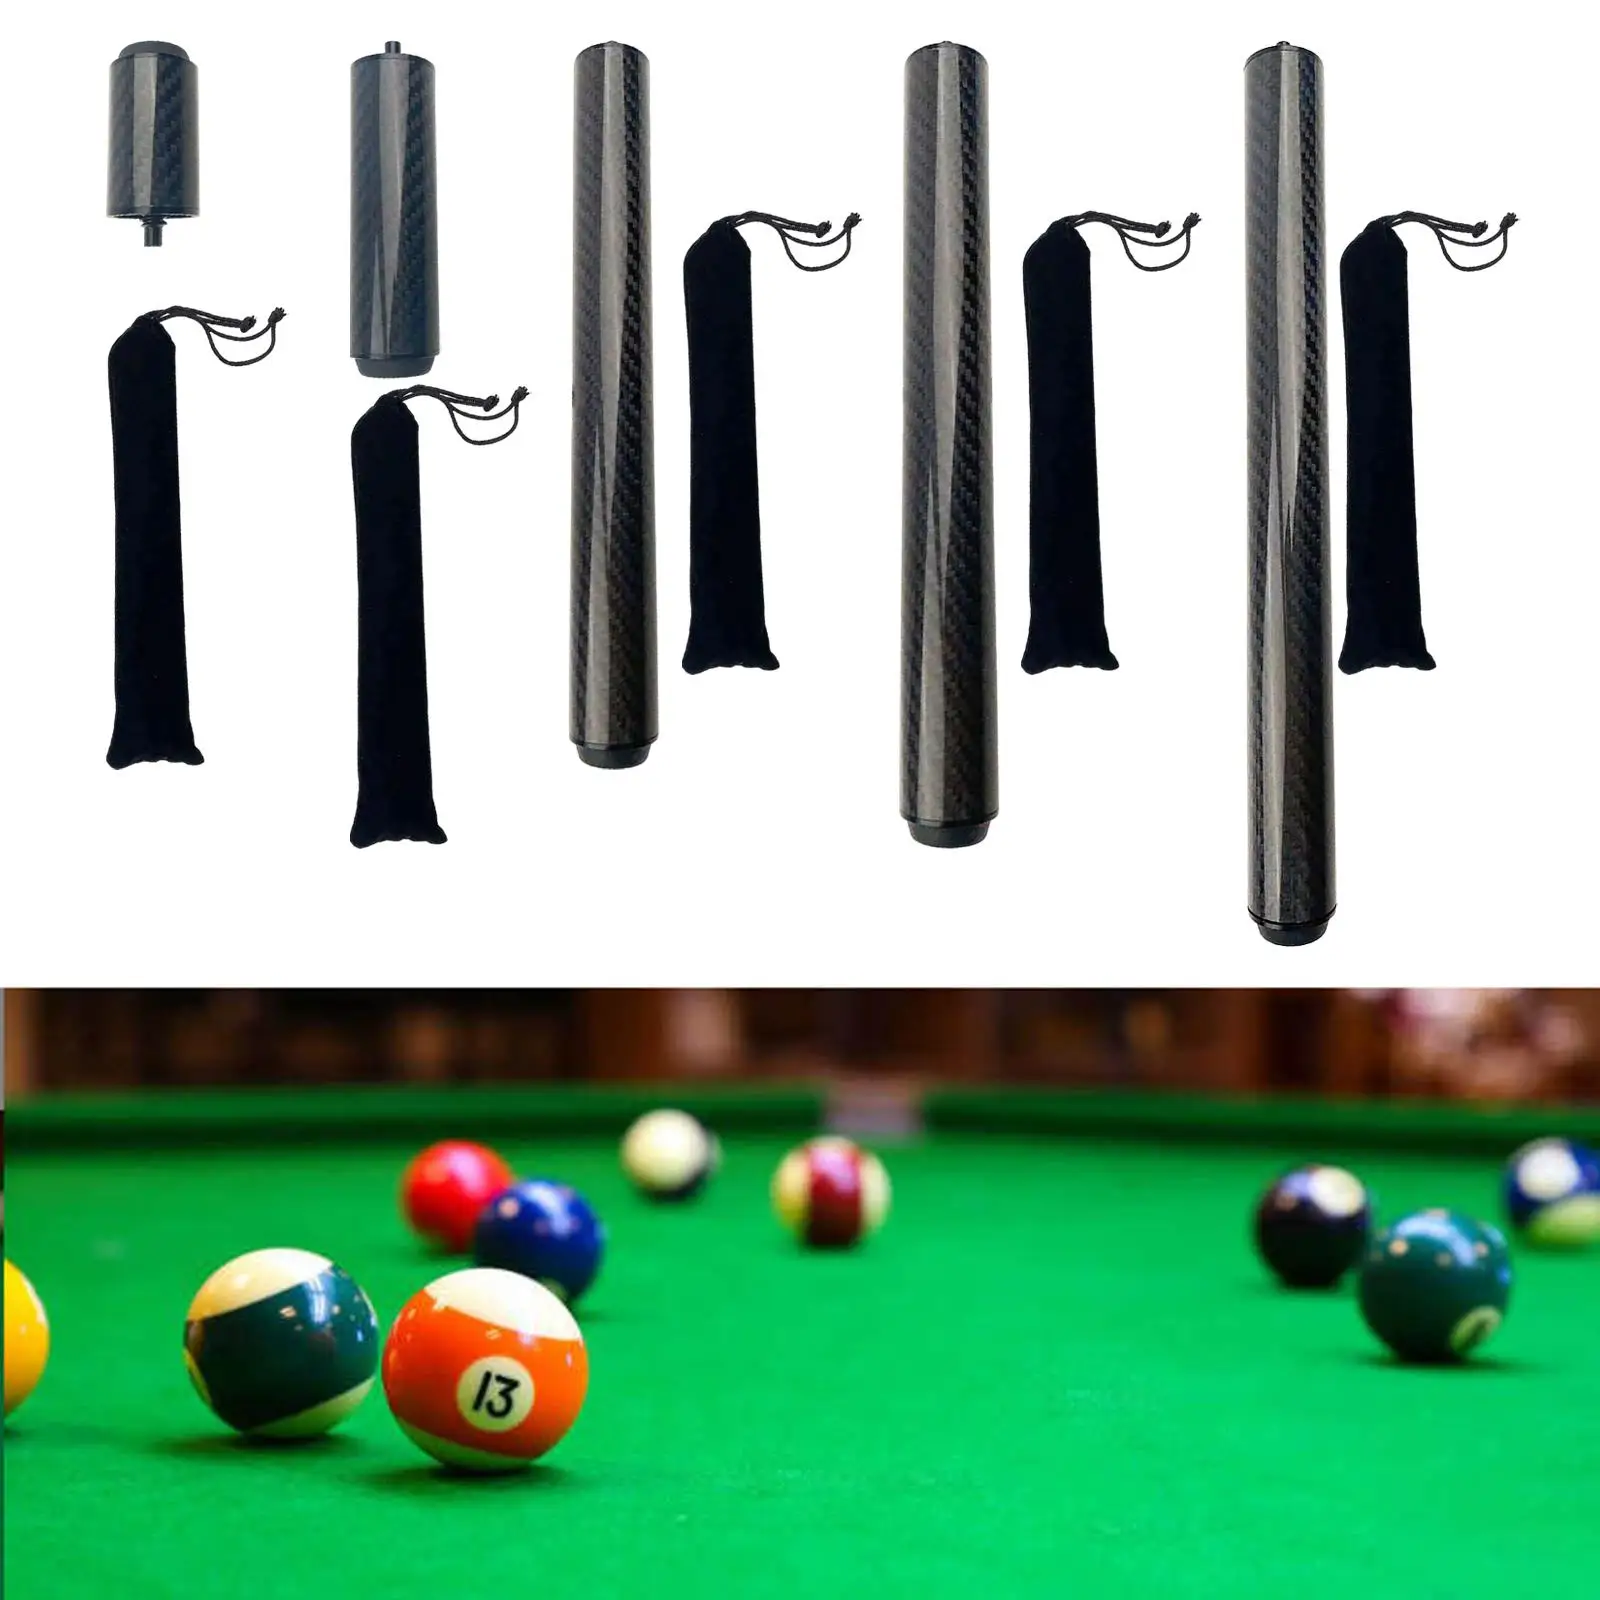 Billiards Pool Cue Extension Billiards Accessories Pool Cue Weight Screw Weights Replacement Cue Stick Extenders for Lovers